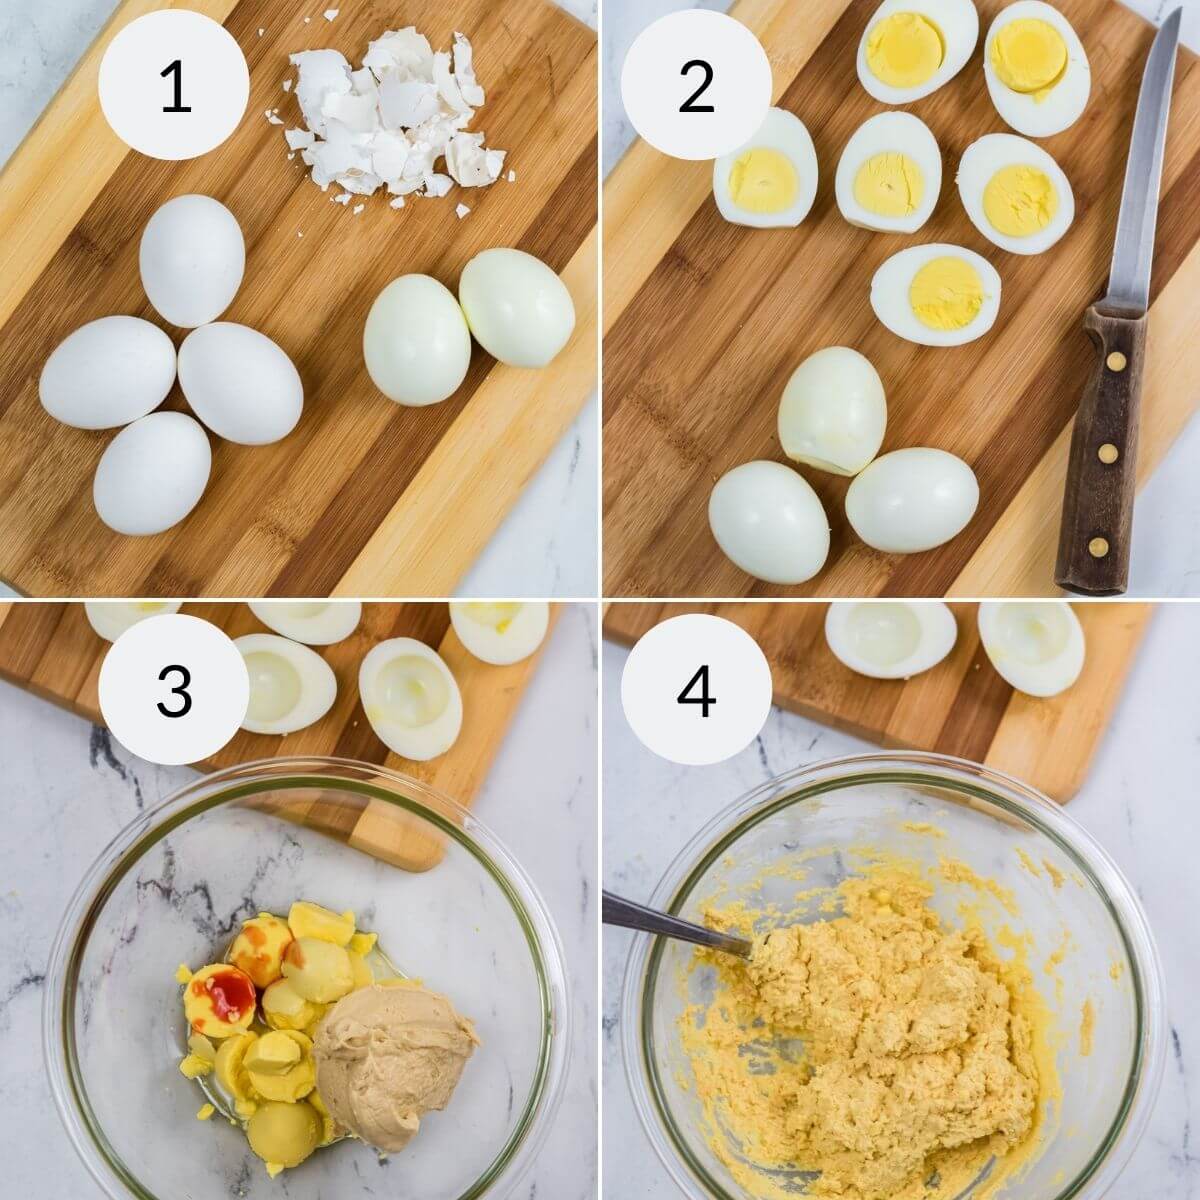 Step-by-step process of making Million Dollar Deviled Eggs: peeling boiled eggs, slicing and removing yolks, mixing yolks with ingredients, and blending into a smooth filling.